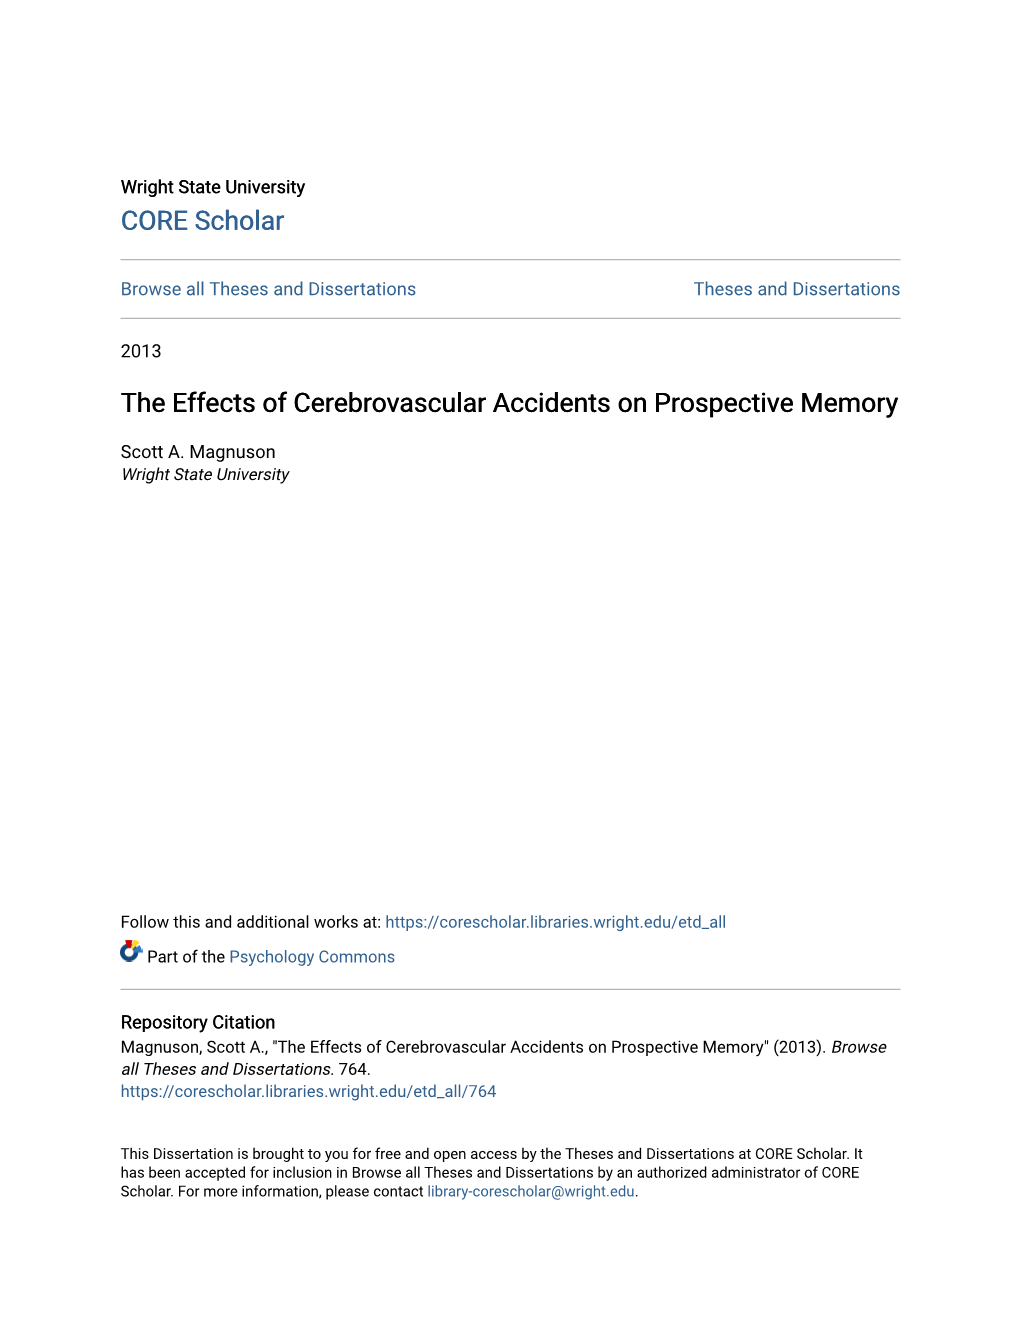 The Effects of Cerebrovascular Accidents on Prospective Memory